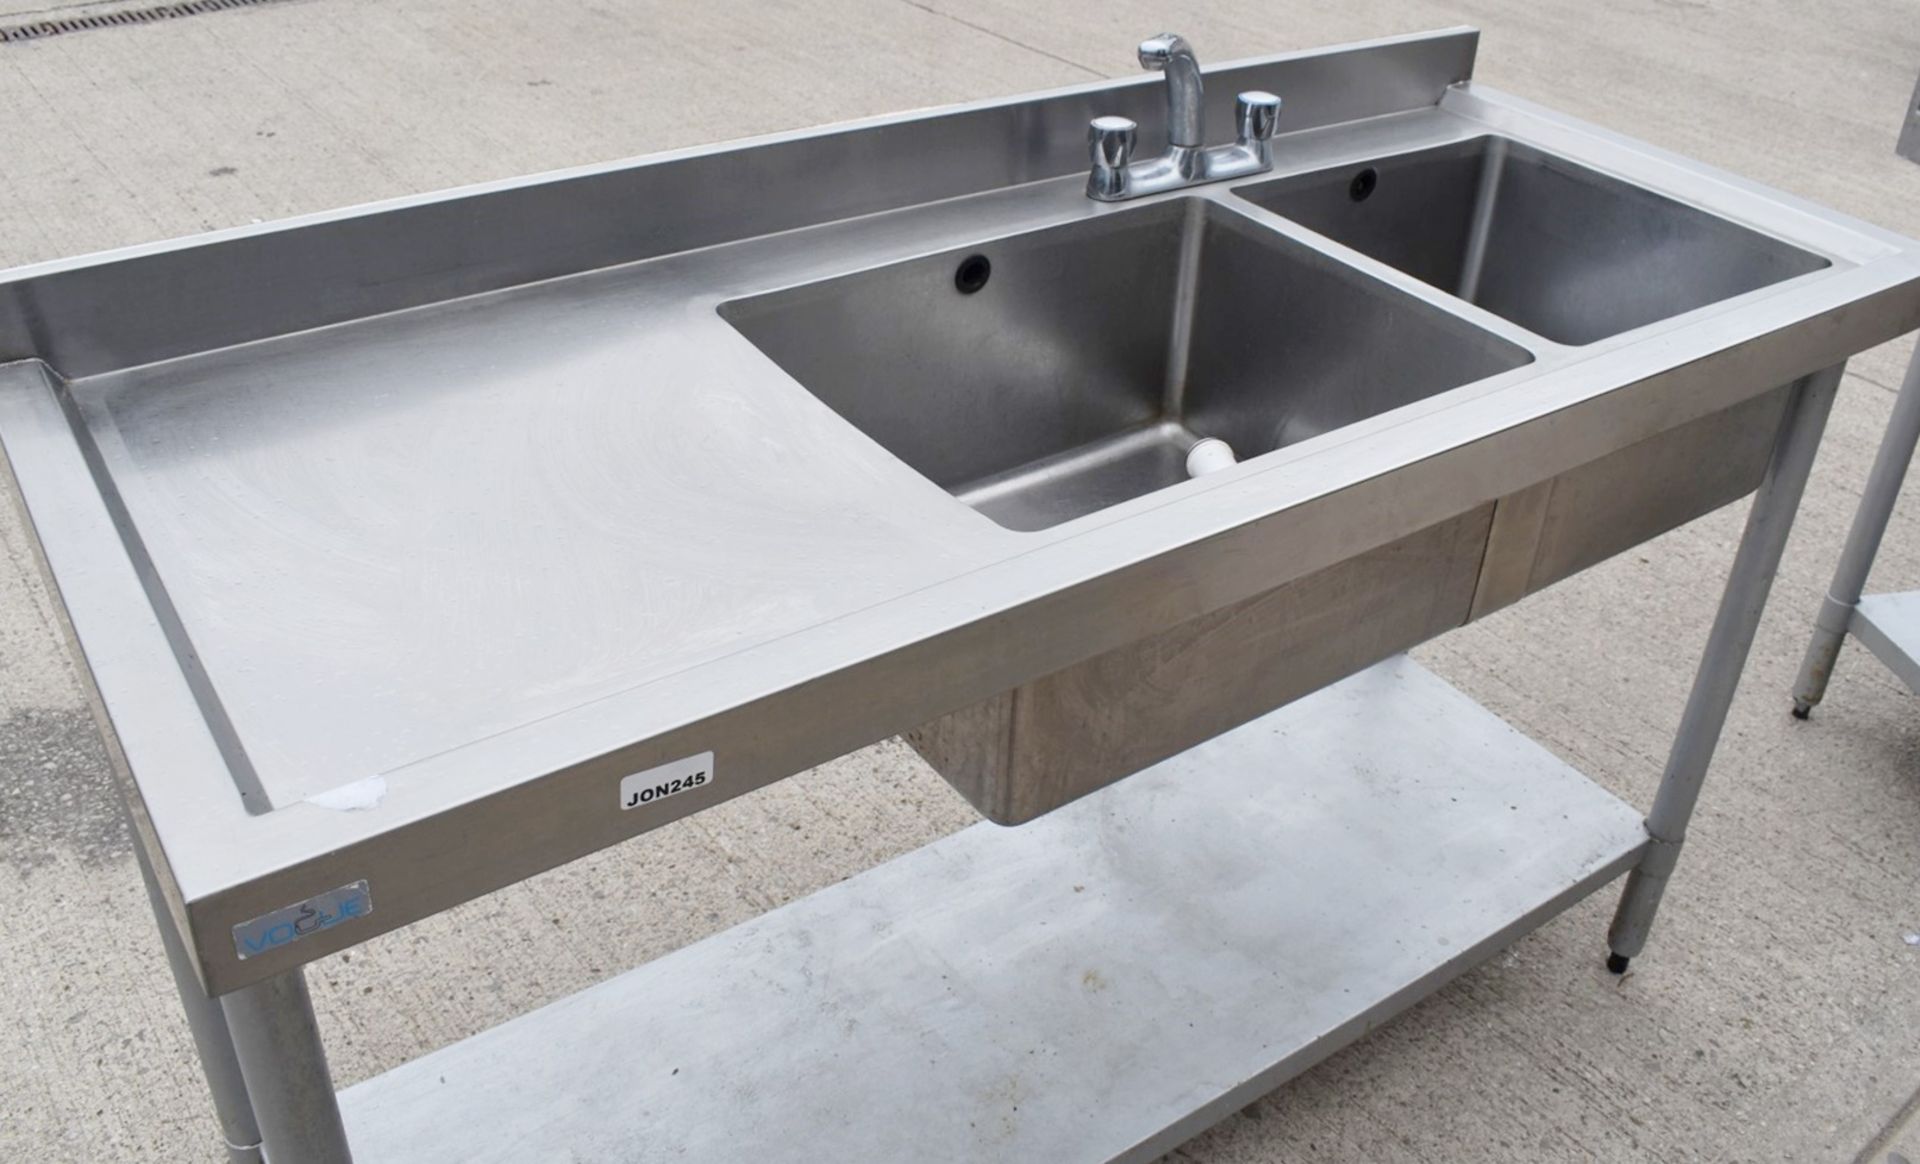 1 x Vogue Stainless Steel Twin Sink Wash Stand With Mixer Tap, Upstand & Undershelf - Image 11 of 11